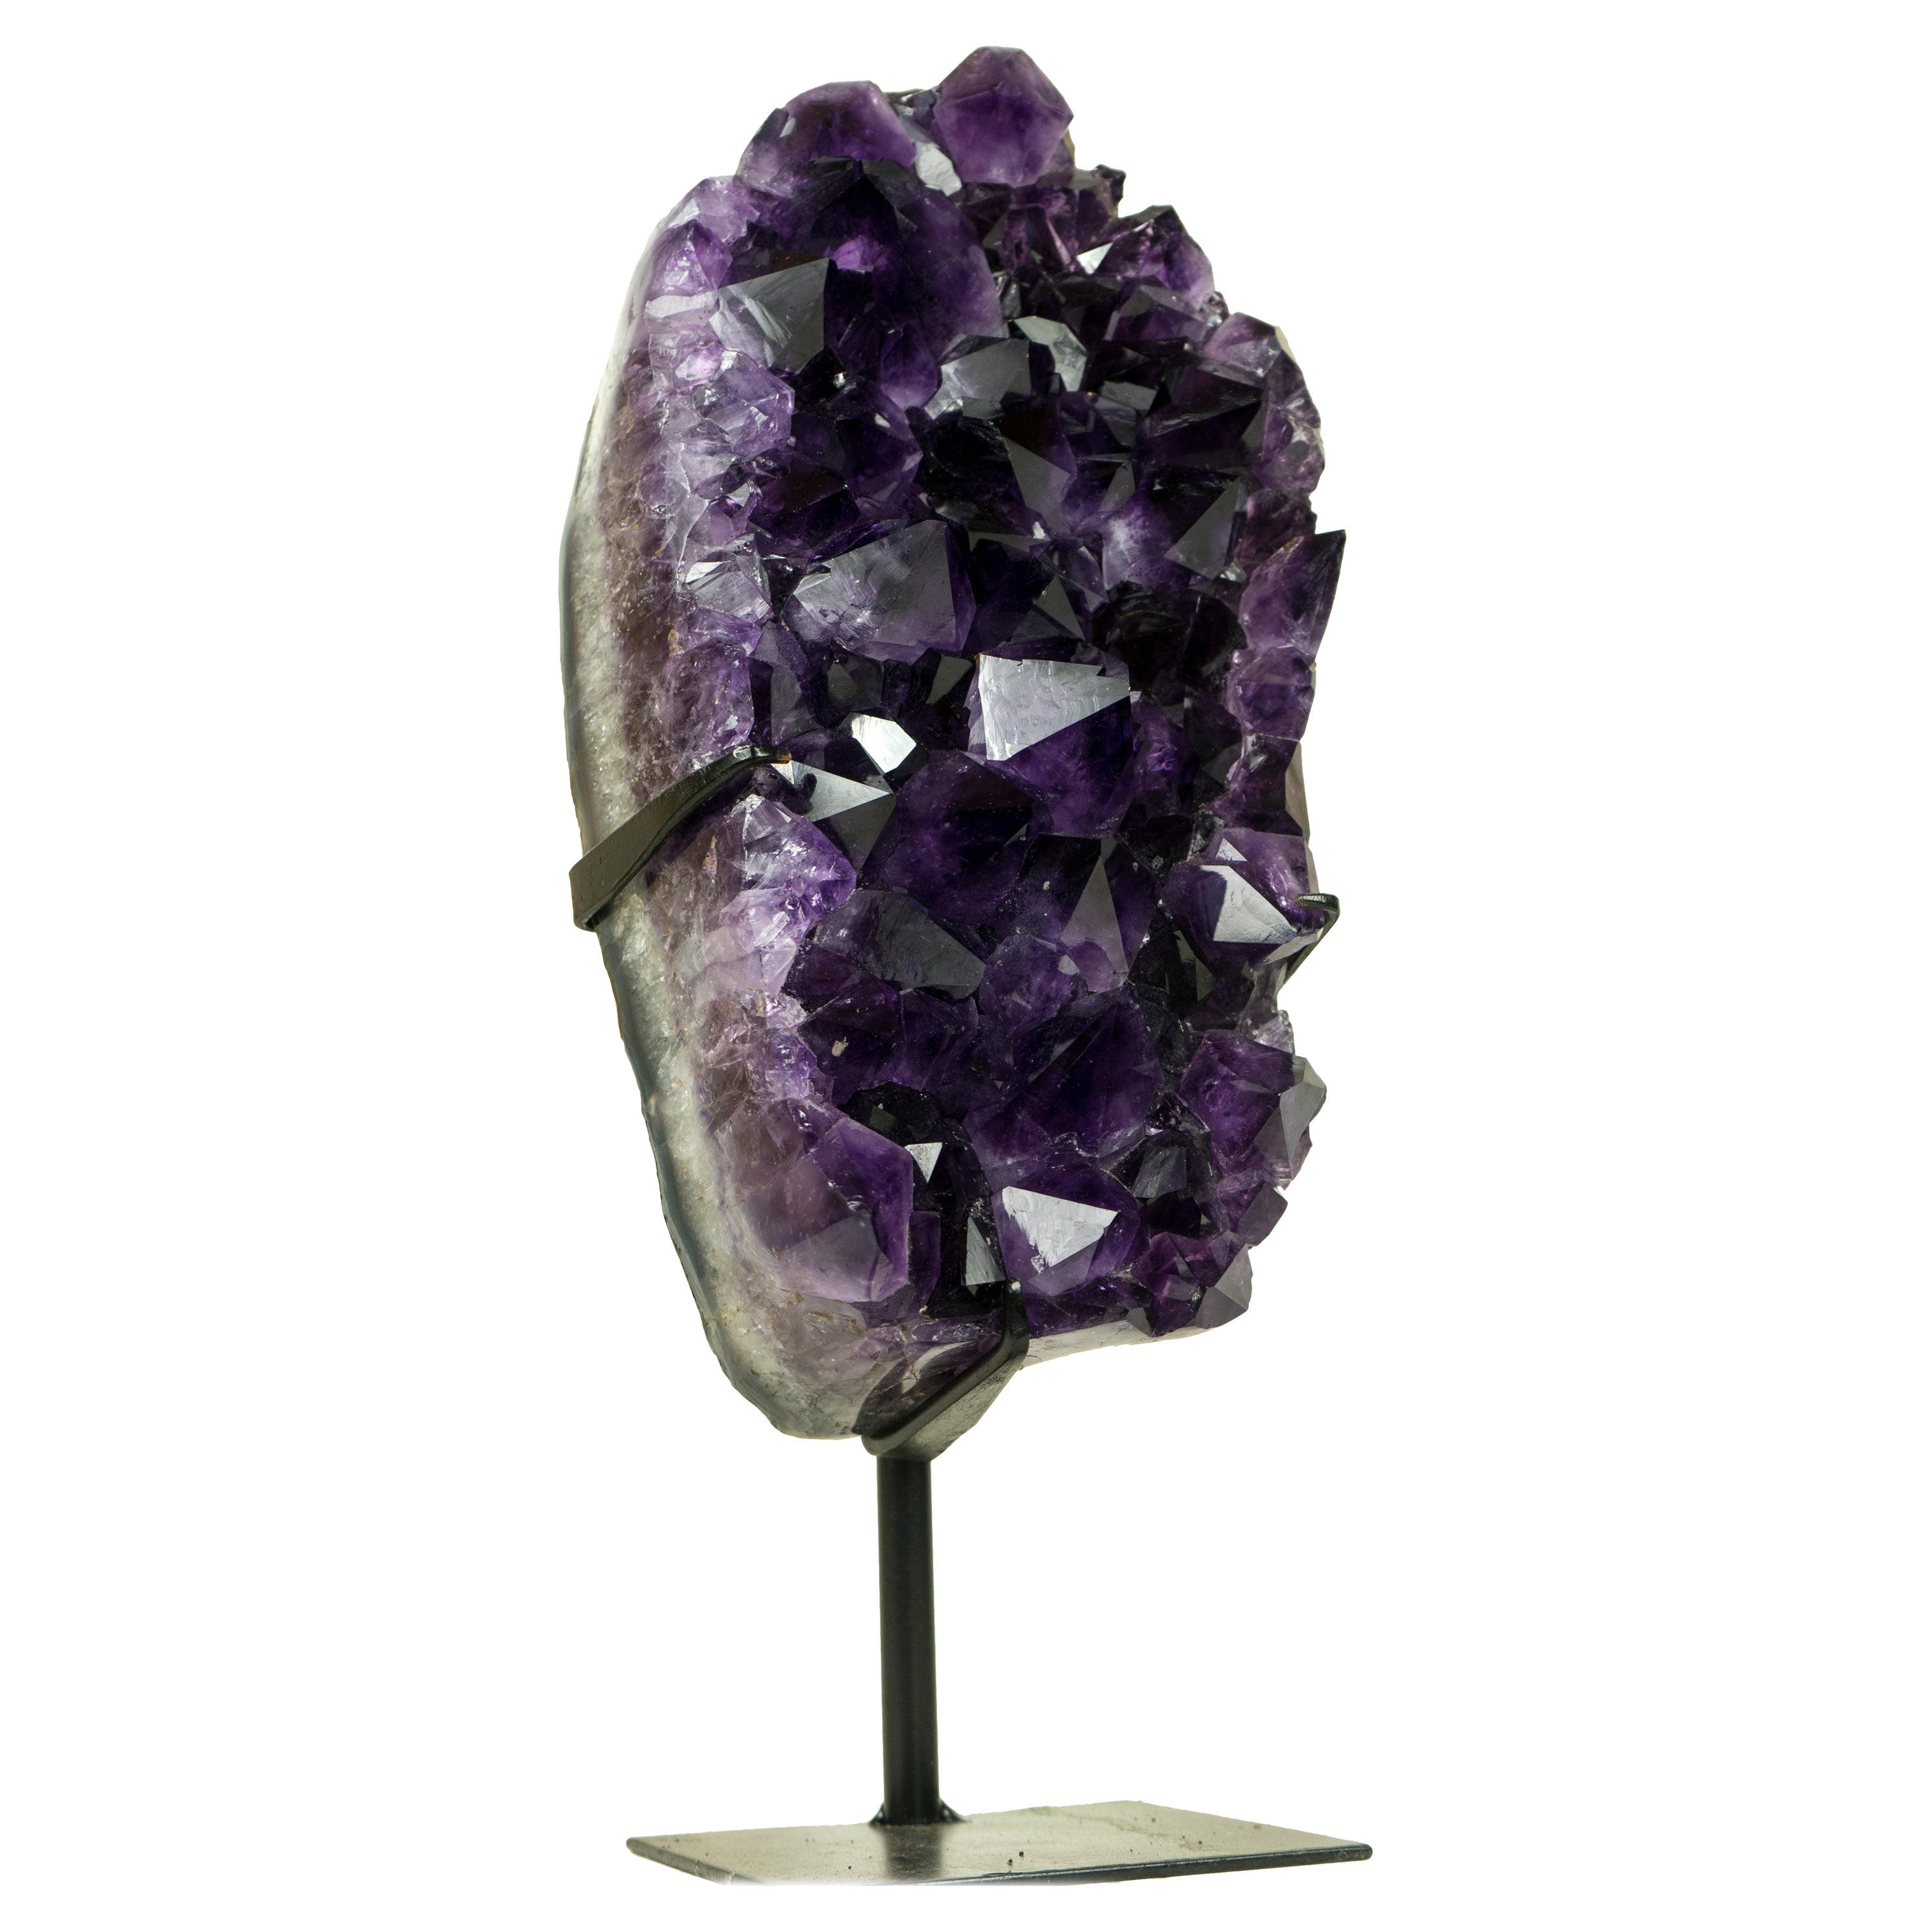 All Natural Amethyst Geode Cluster with World-Class Grape Purple Amethyst Druzy